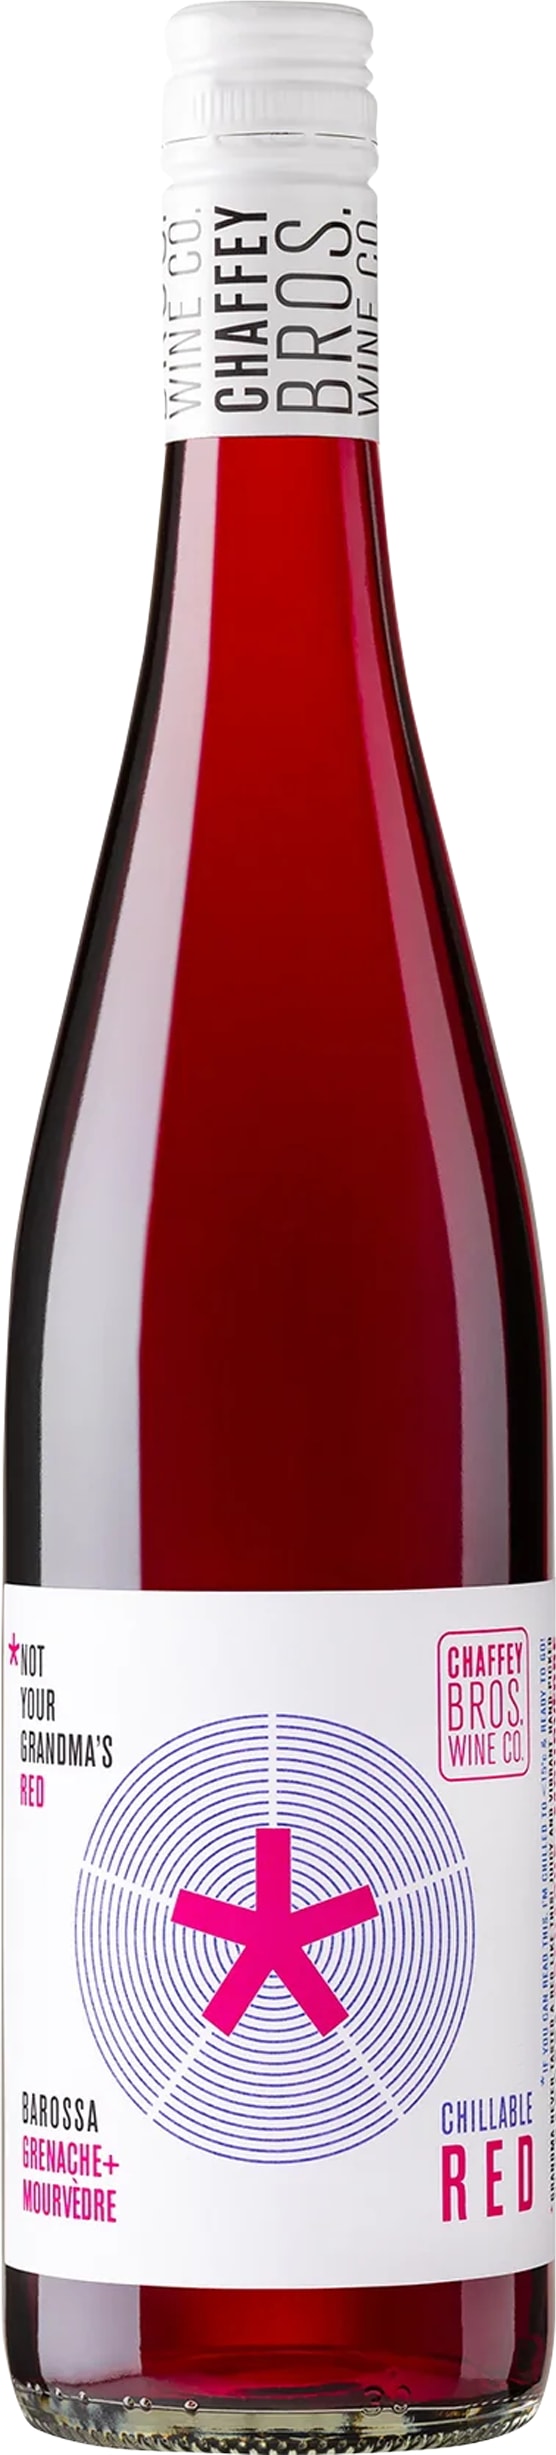 Chaffey Bros Wine Co Not Your Grandma's Chillable Red 2021 75cl - Buy Chaffey Bros Wine Co Wines from GREAT WINES DIRECT wine shop